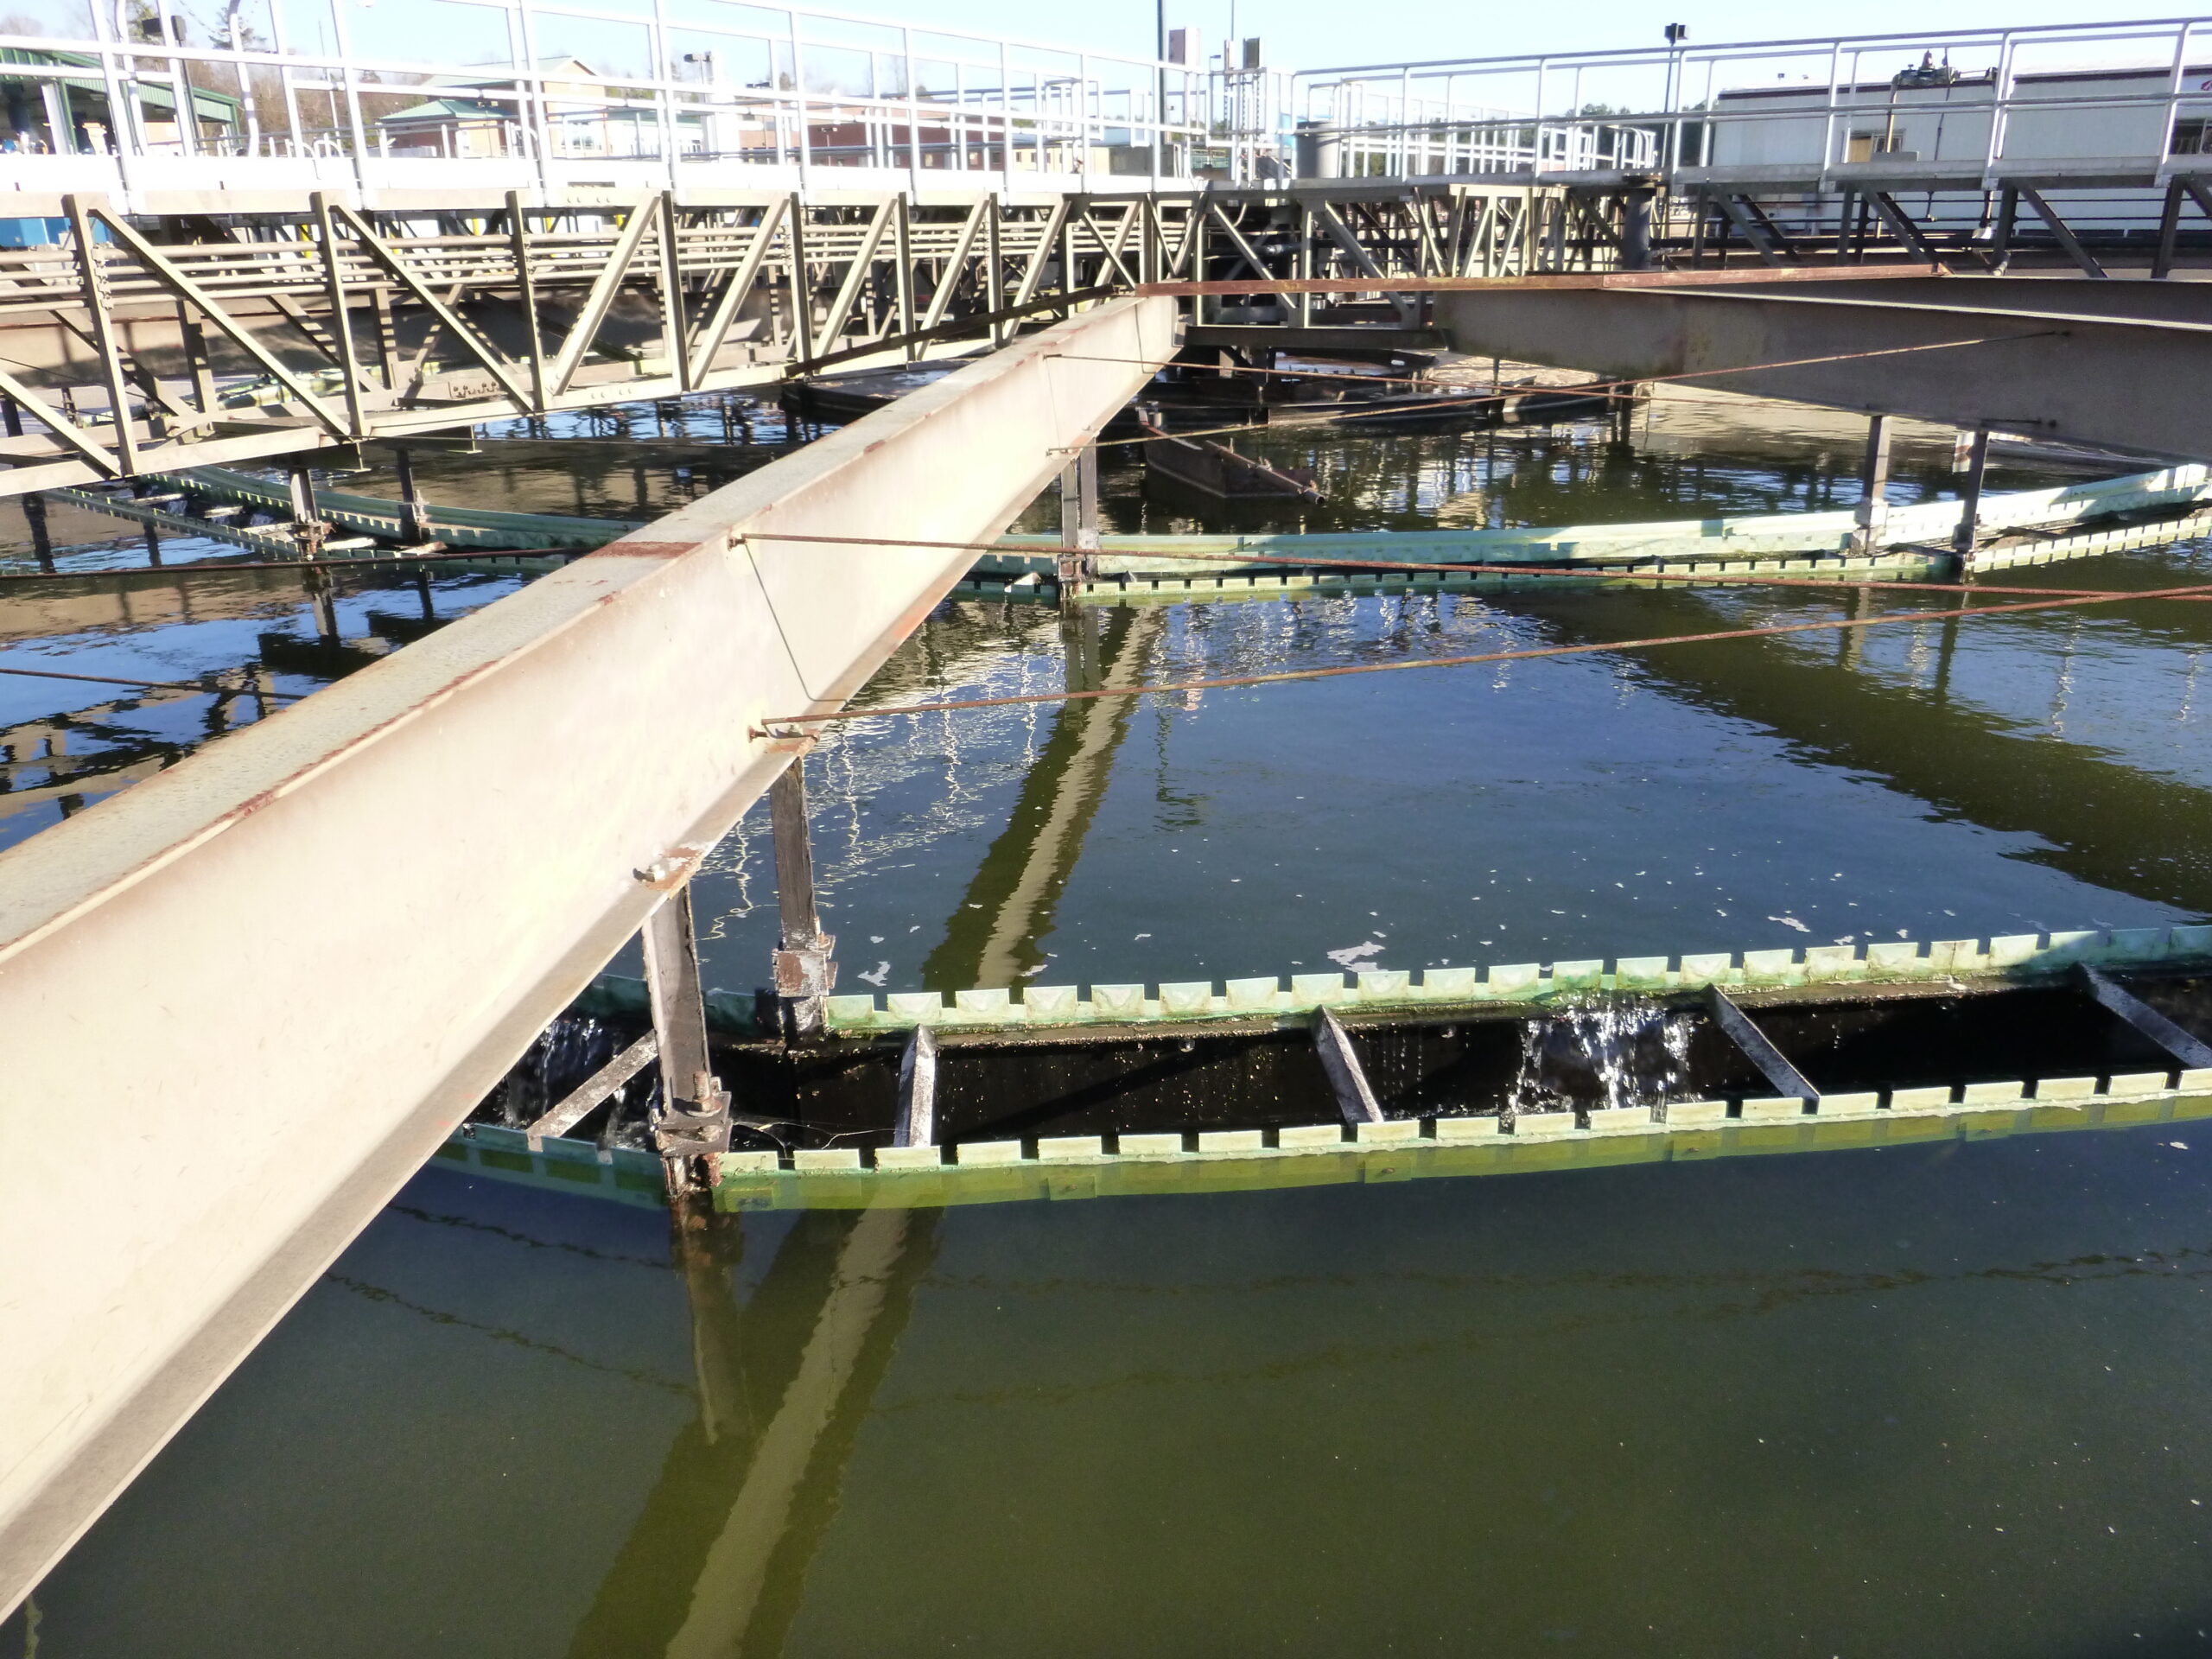 Photo of steel beams and walkways positioned over a dark body of water with a metallic green wastewater treatment unit. This unit is called a secondary clarifier and it separates biological solids, microbes and germs from treated liquid waste.